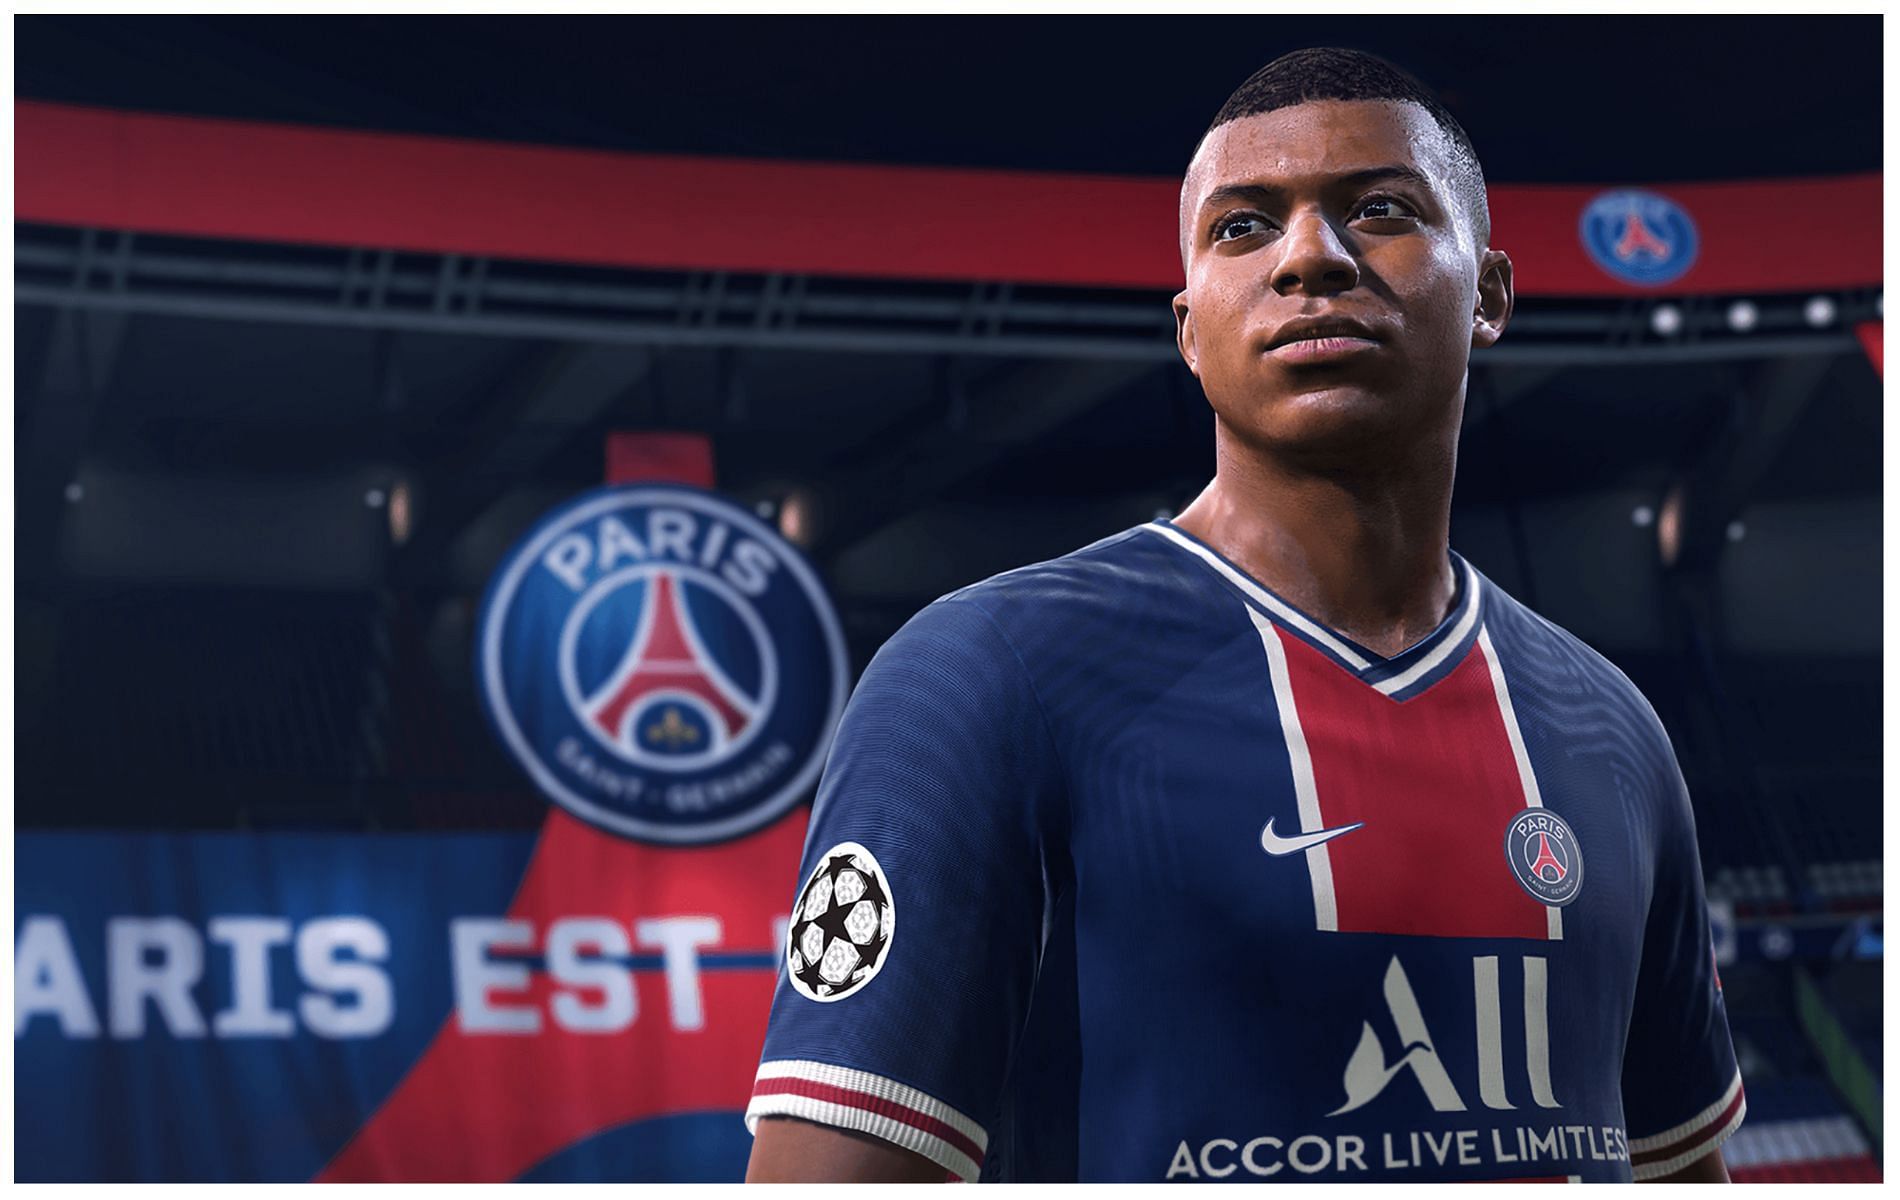 FIFA 23 features Kylian Mbappe as the cover star once again (Image via EA Sports)